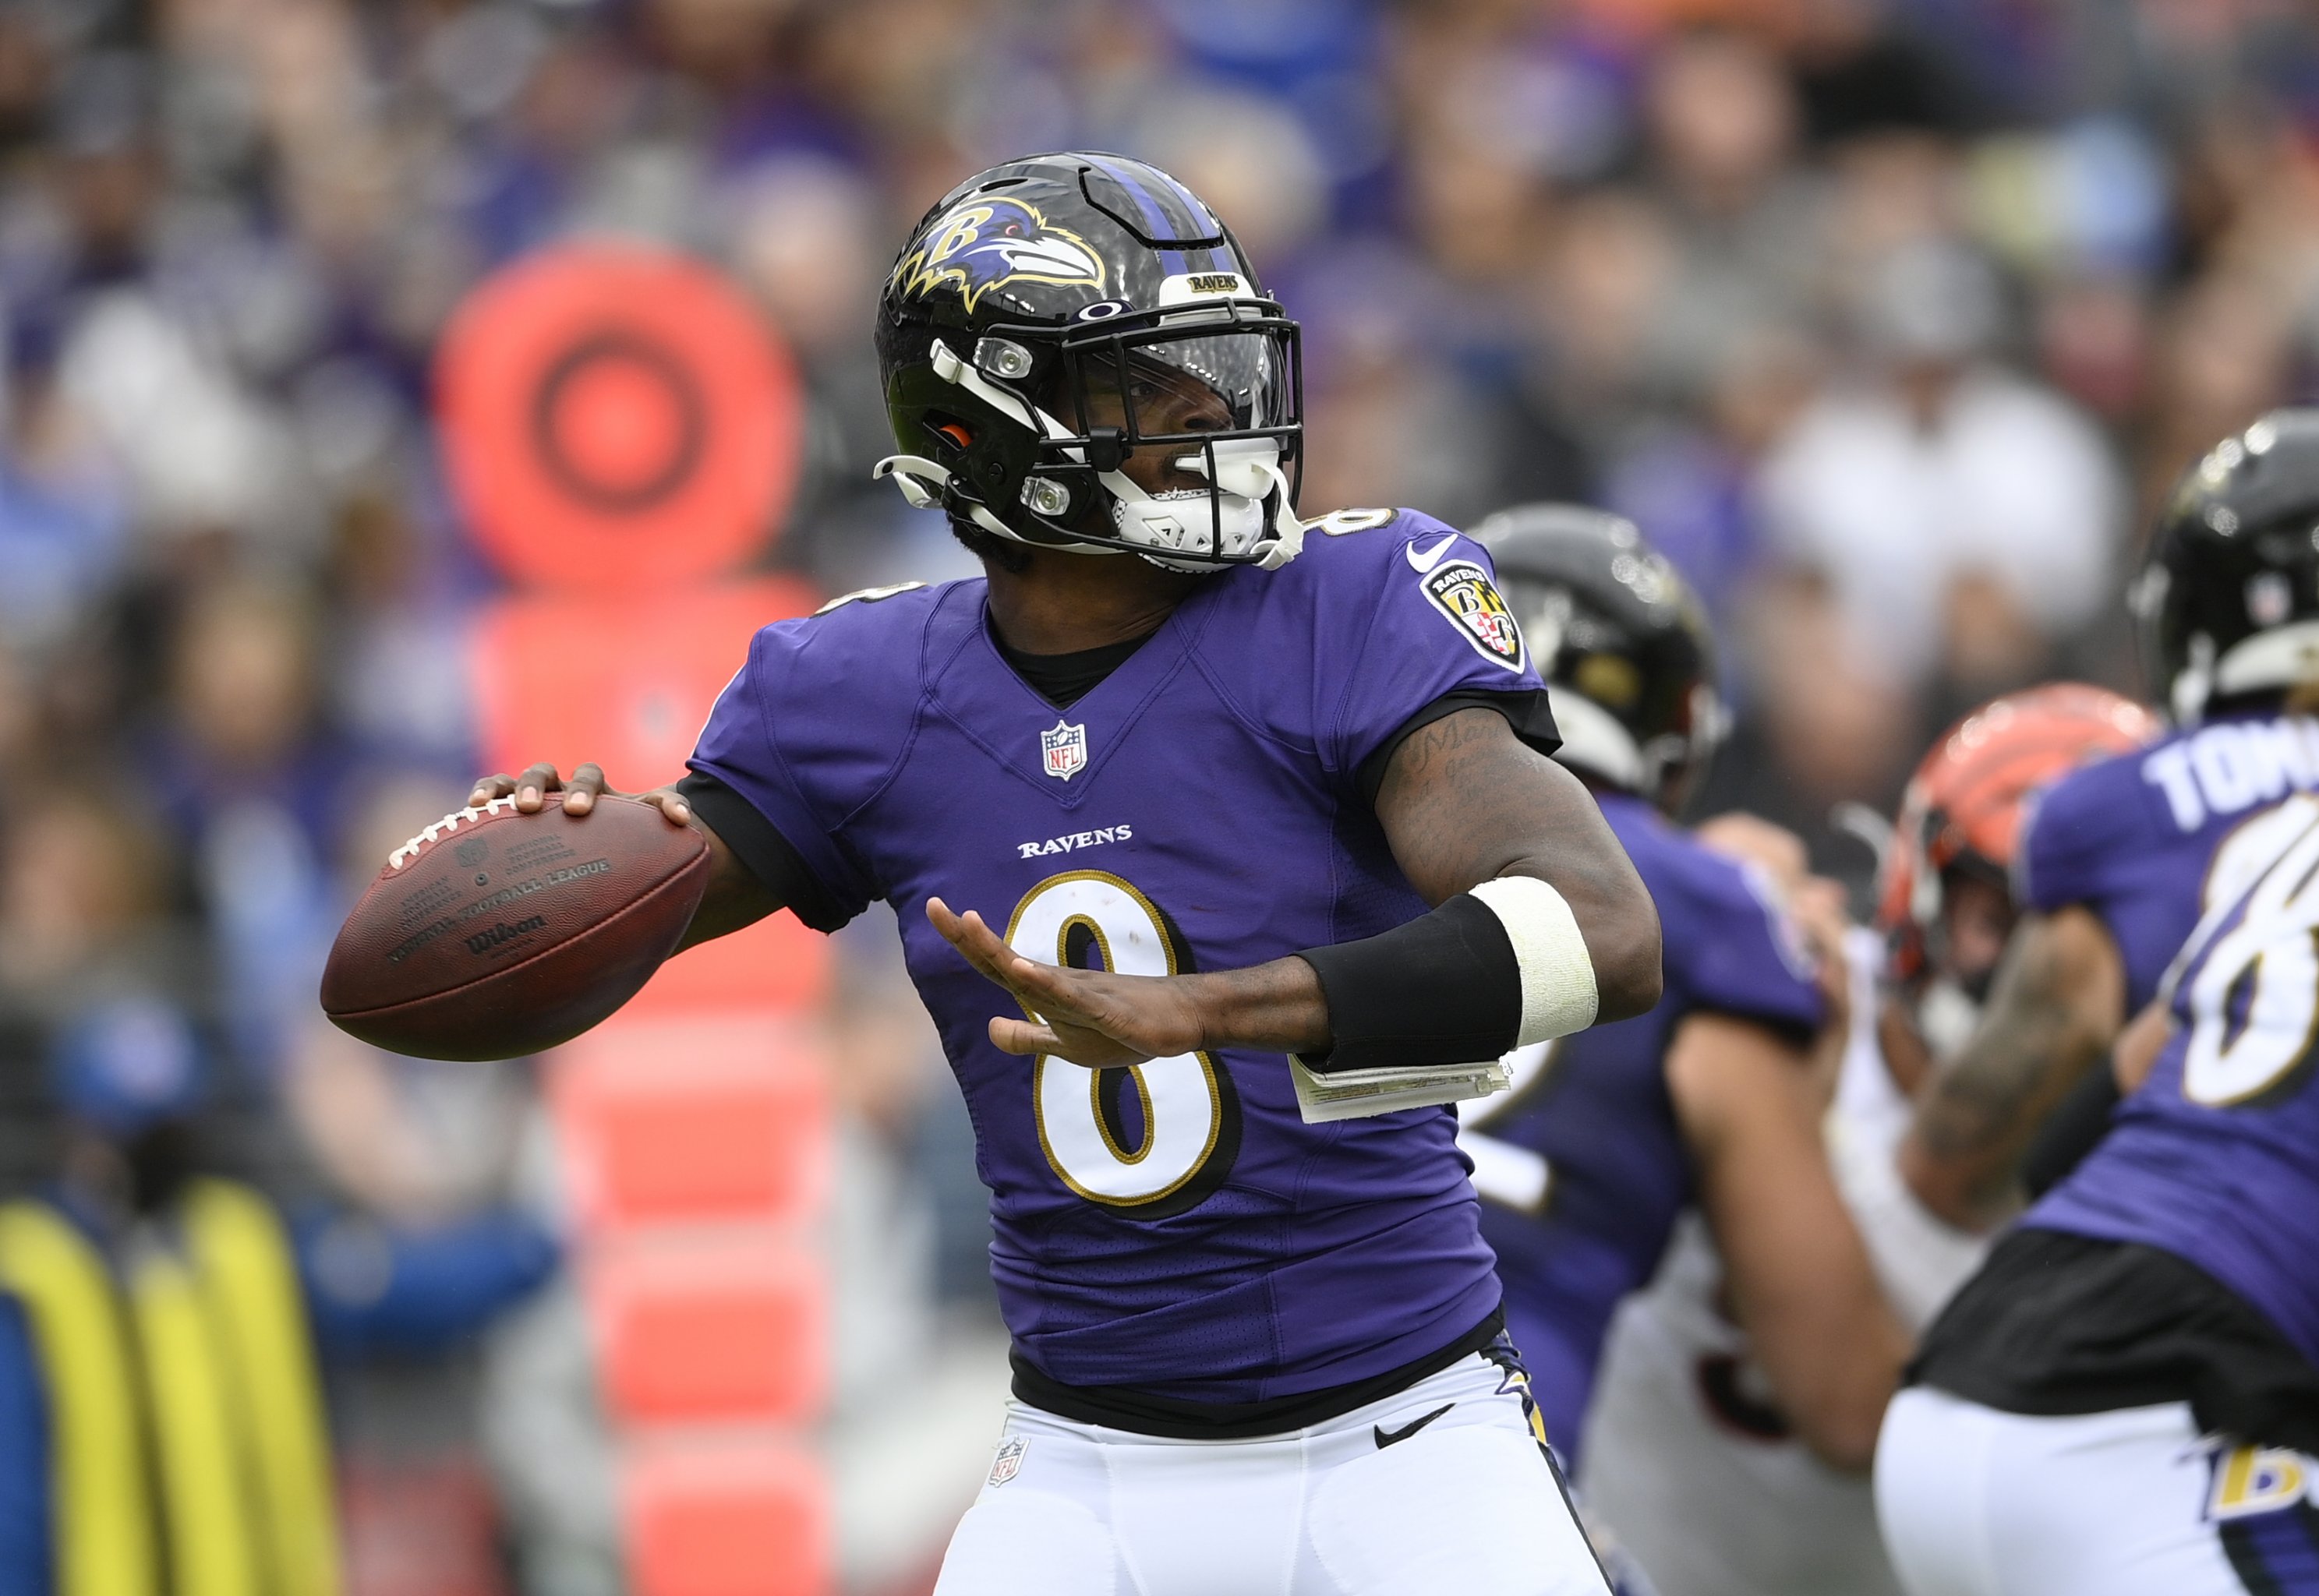 NFL Playoff picture: Baltimore Ravens and Seattle Seahawks surging, NFL  News